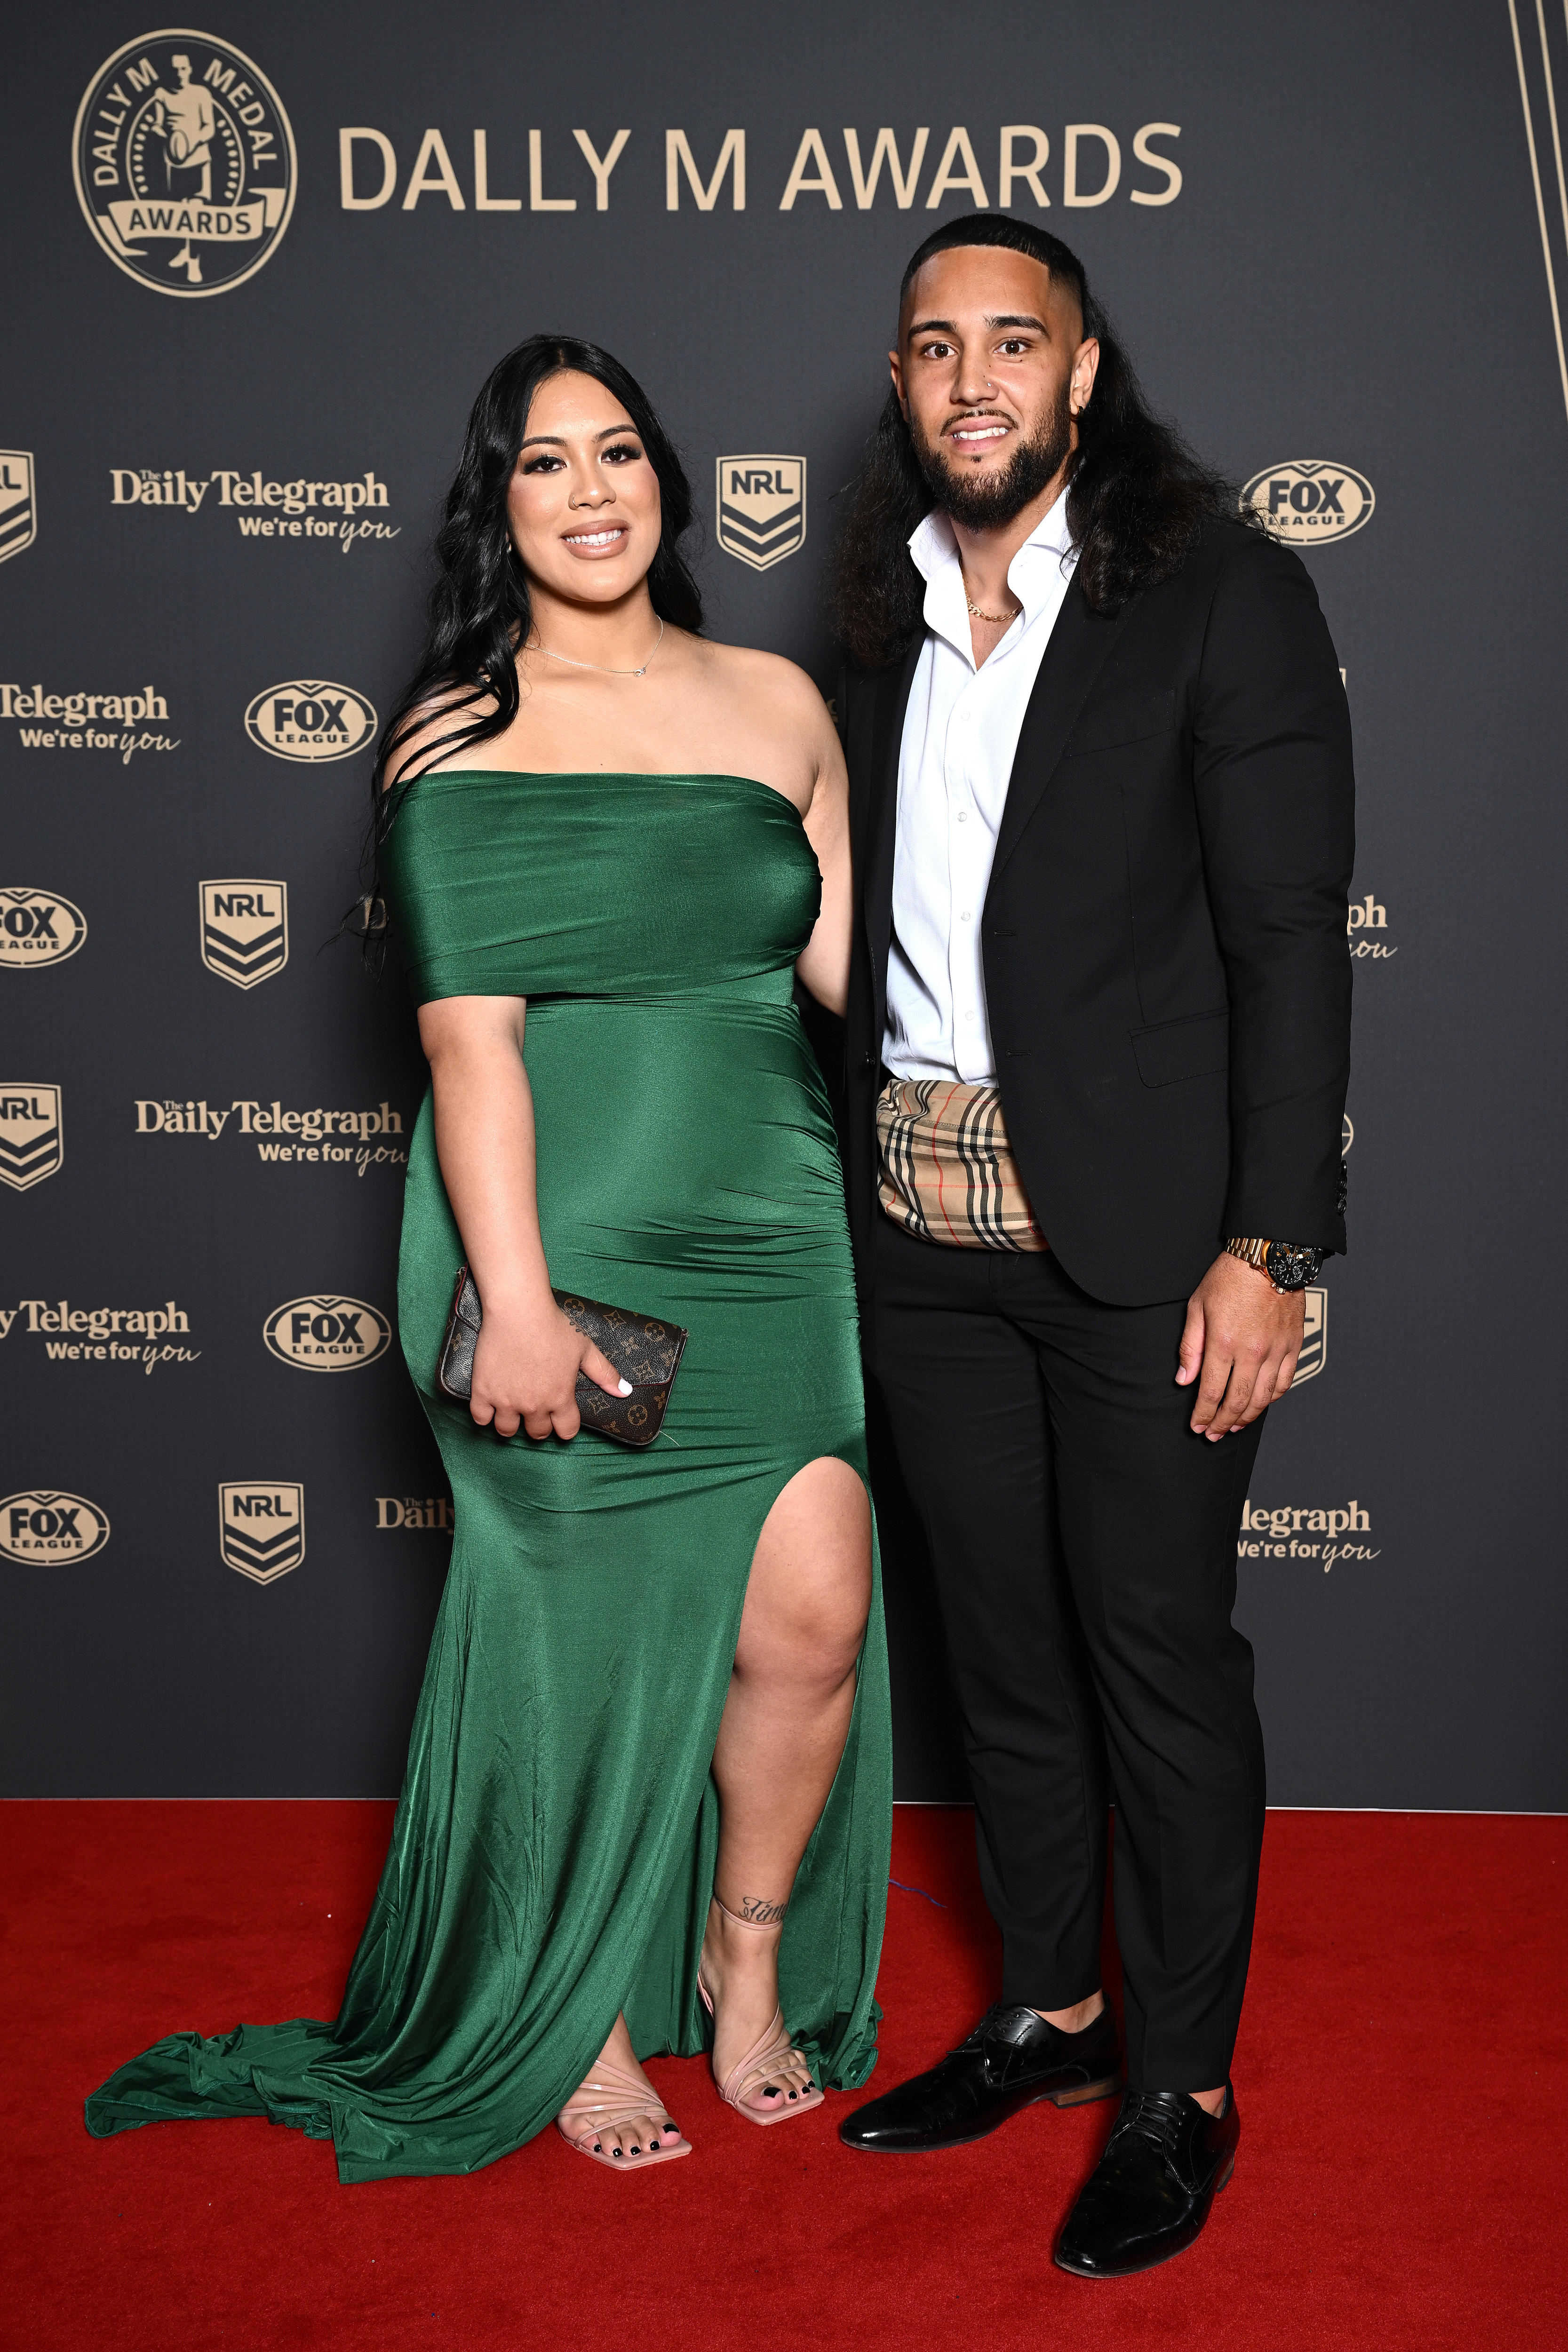 Dally M Awards 2022 The fashion on the red carpet as the NRL crowns its player of the year